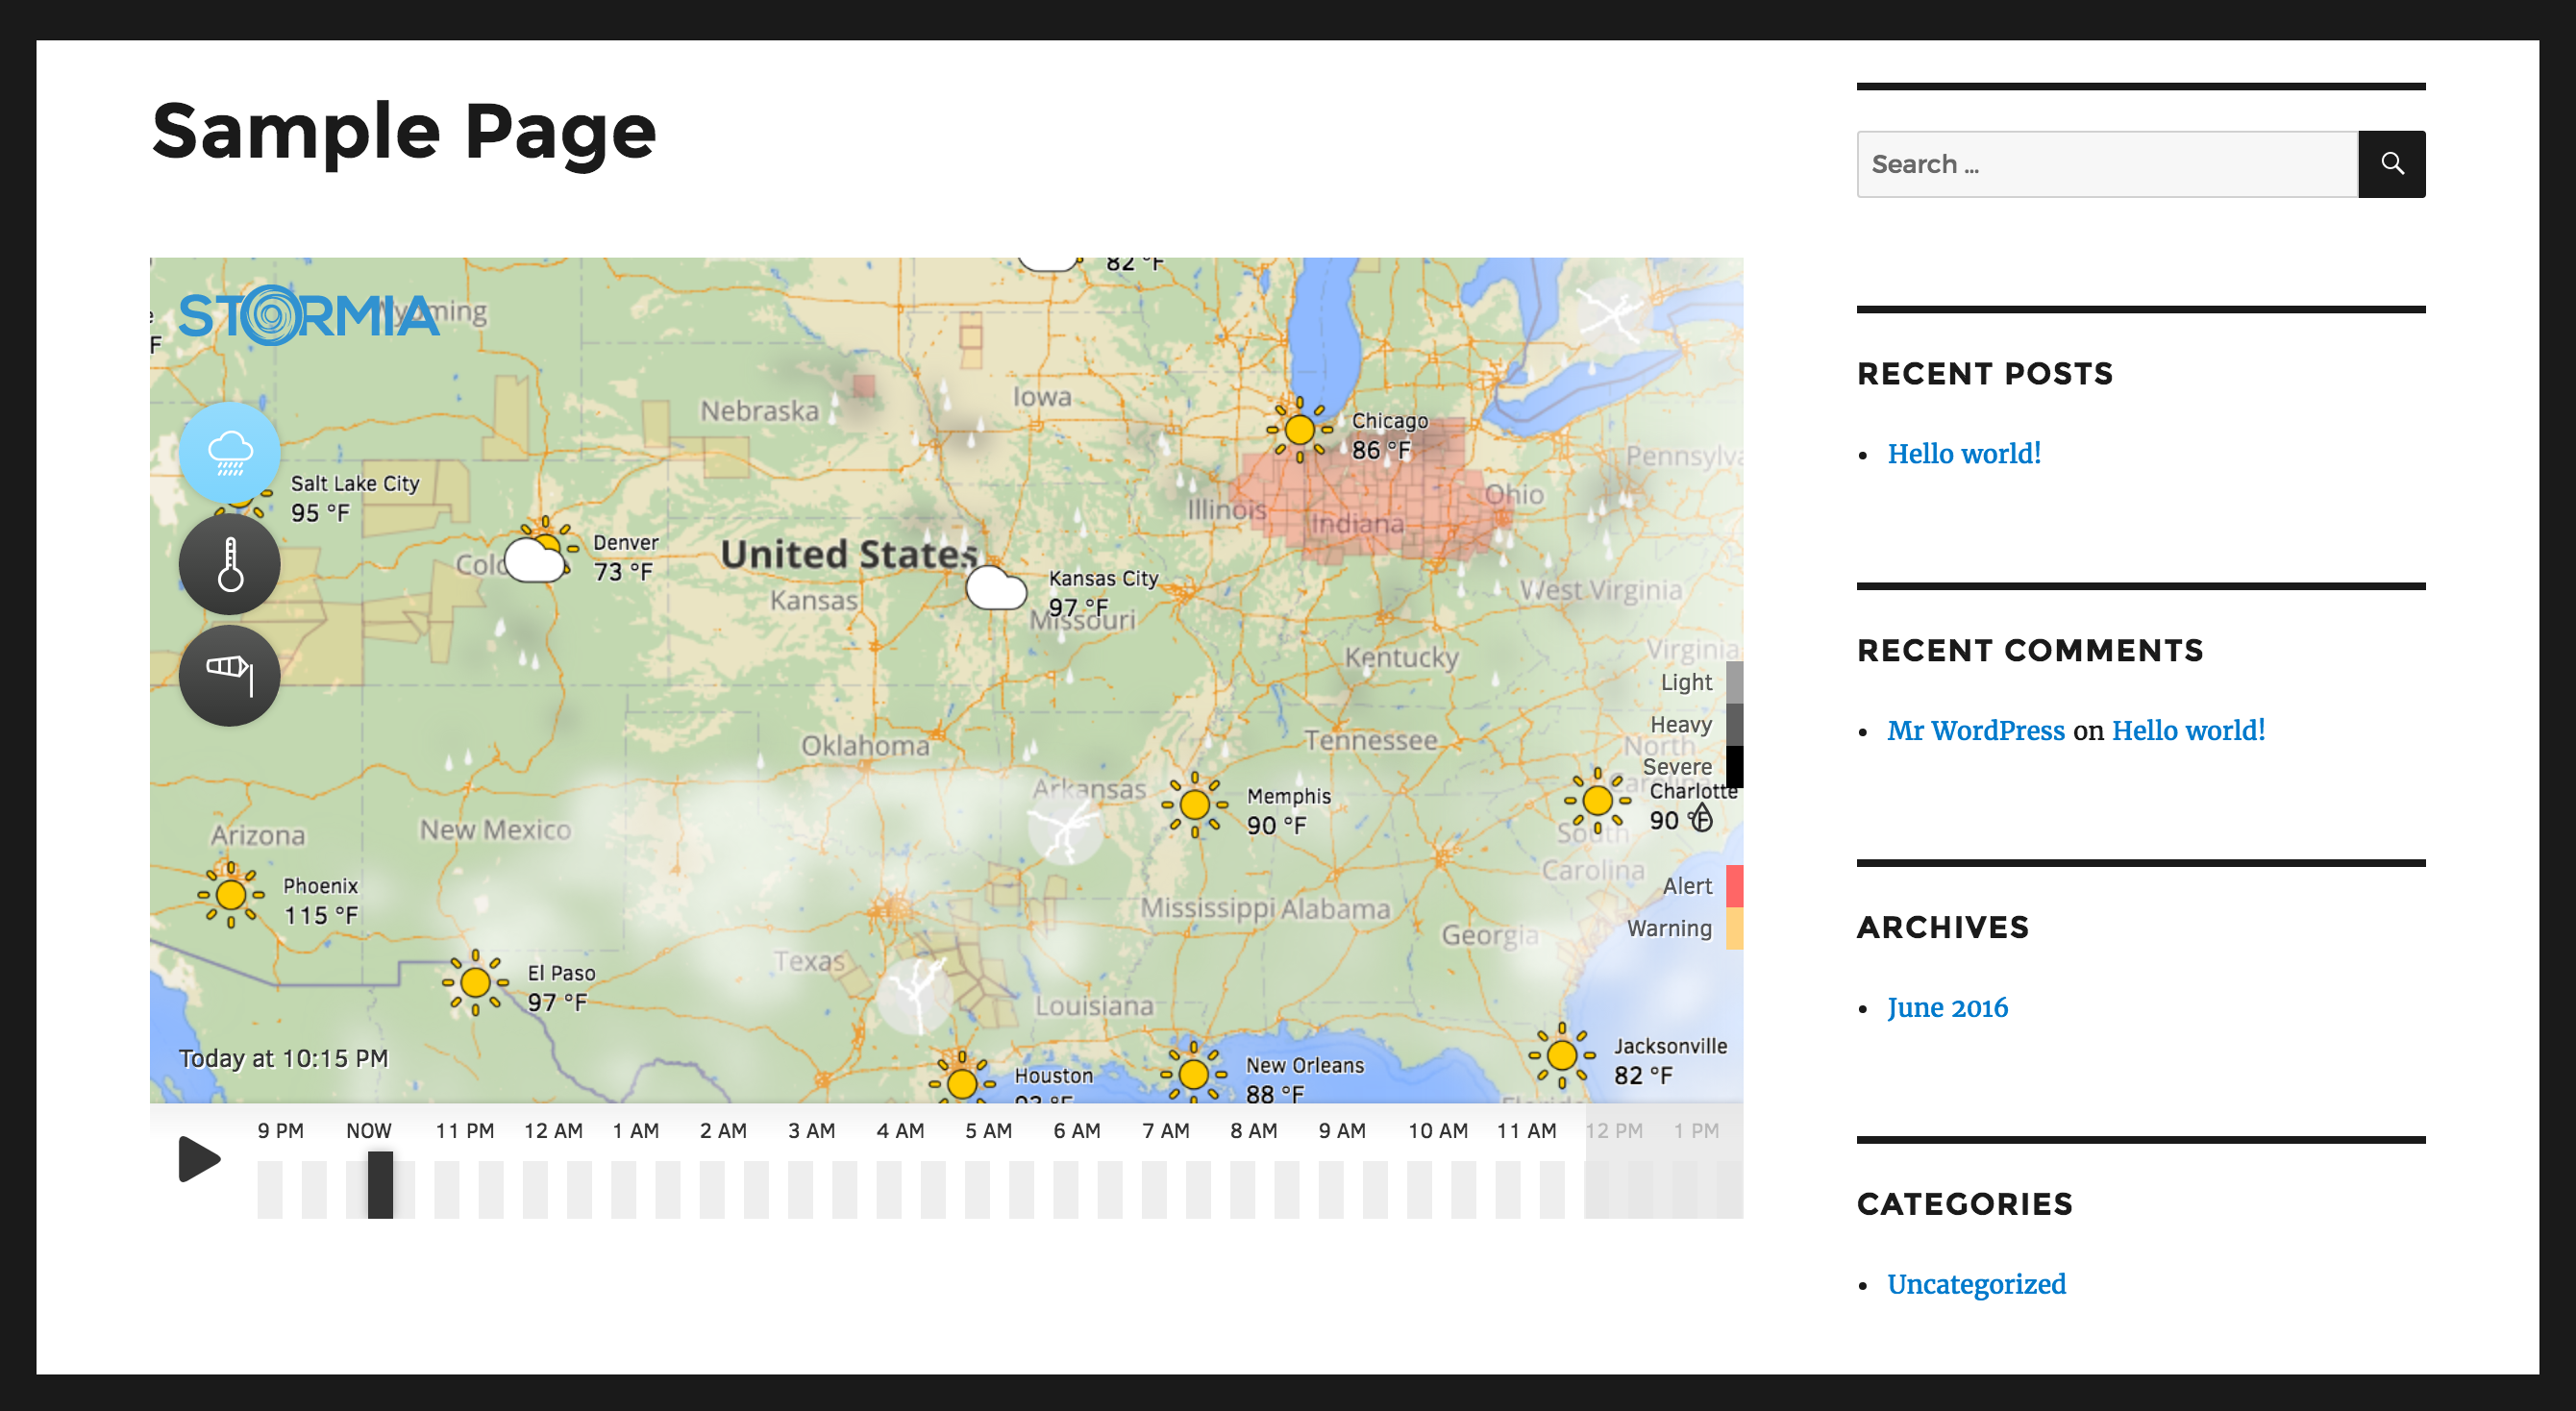 Demo of the Stormia map on a WordPress page.